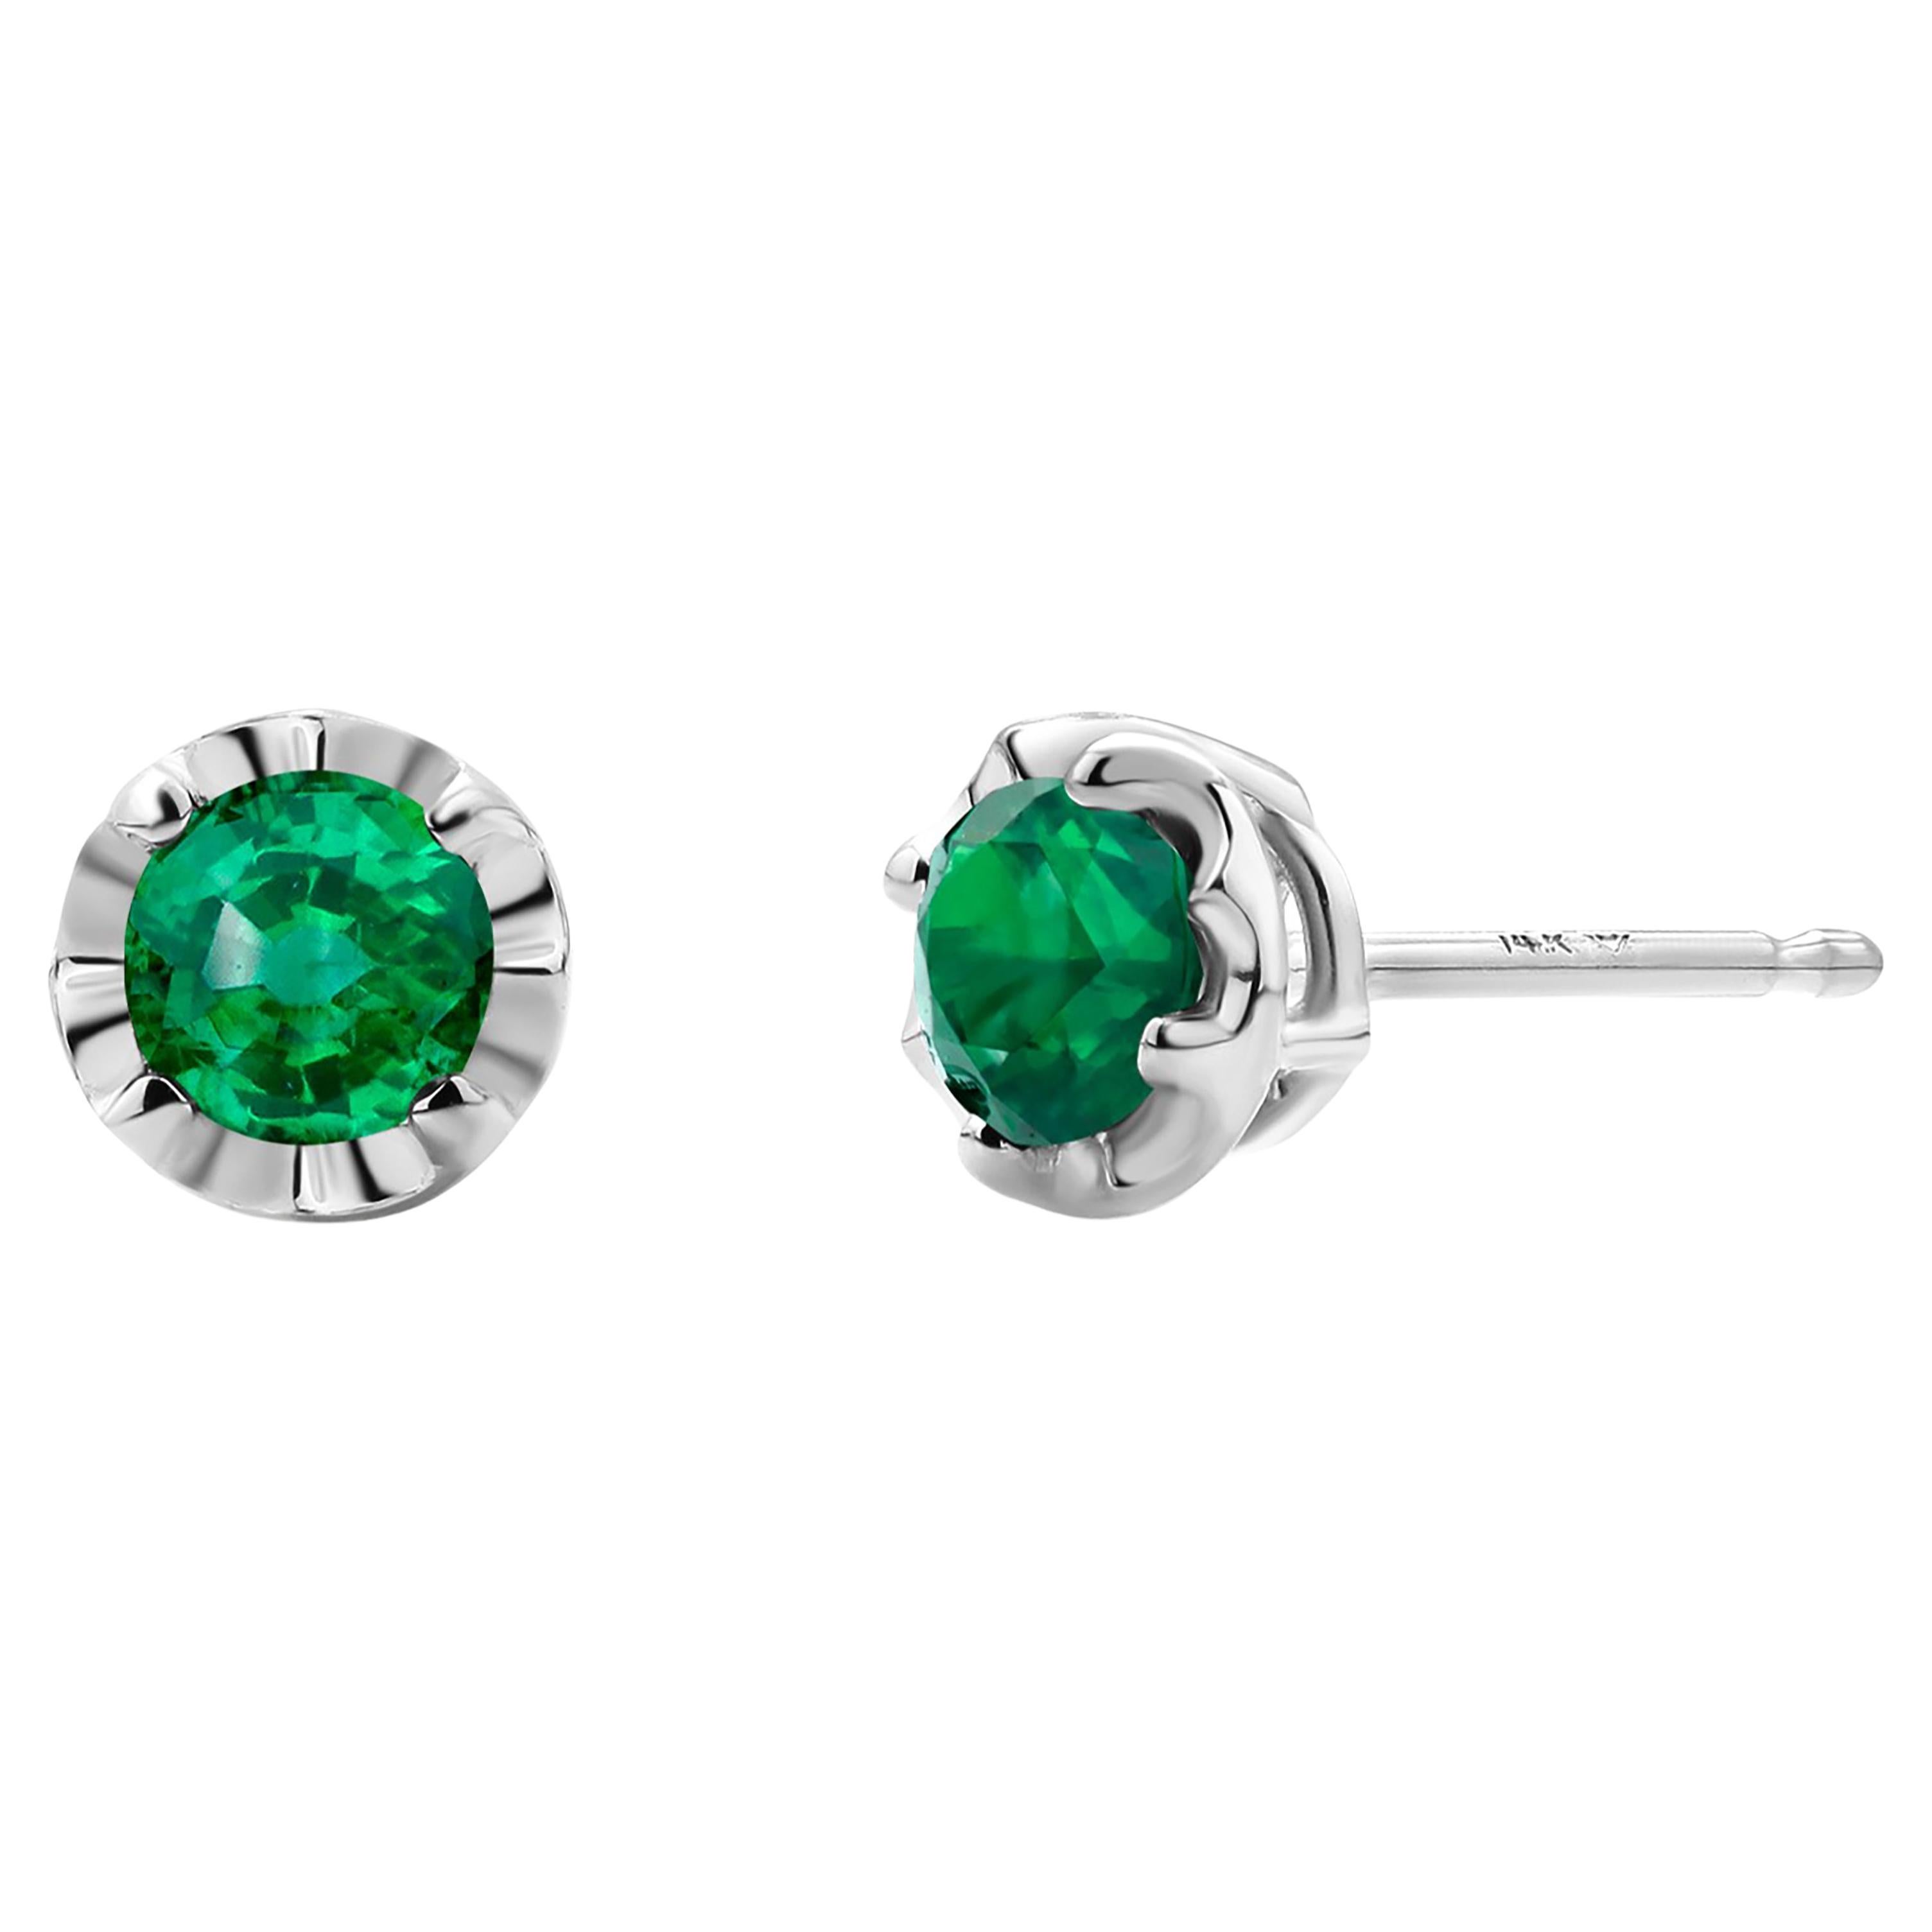 Matched Emerald 0.25 Inch Scalloped Bezel Set White Gold 0.19 Inch Stud Earrings For Sale